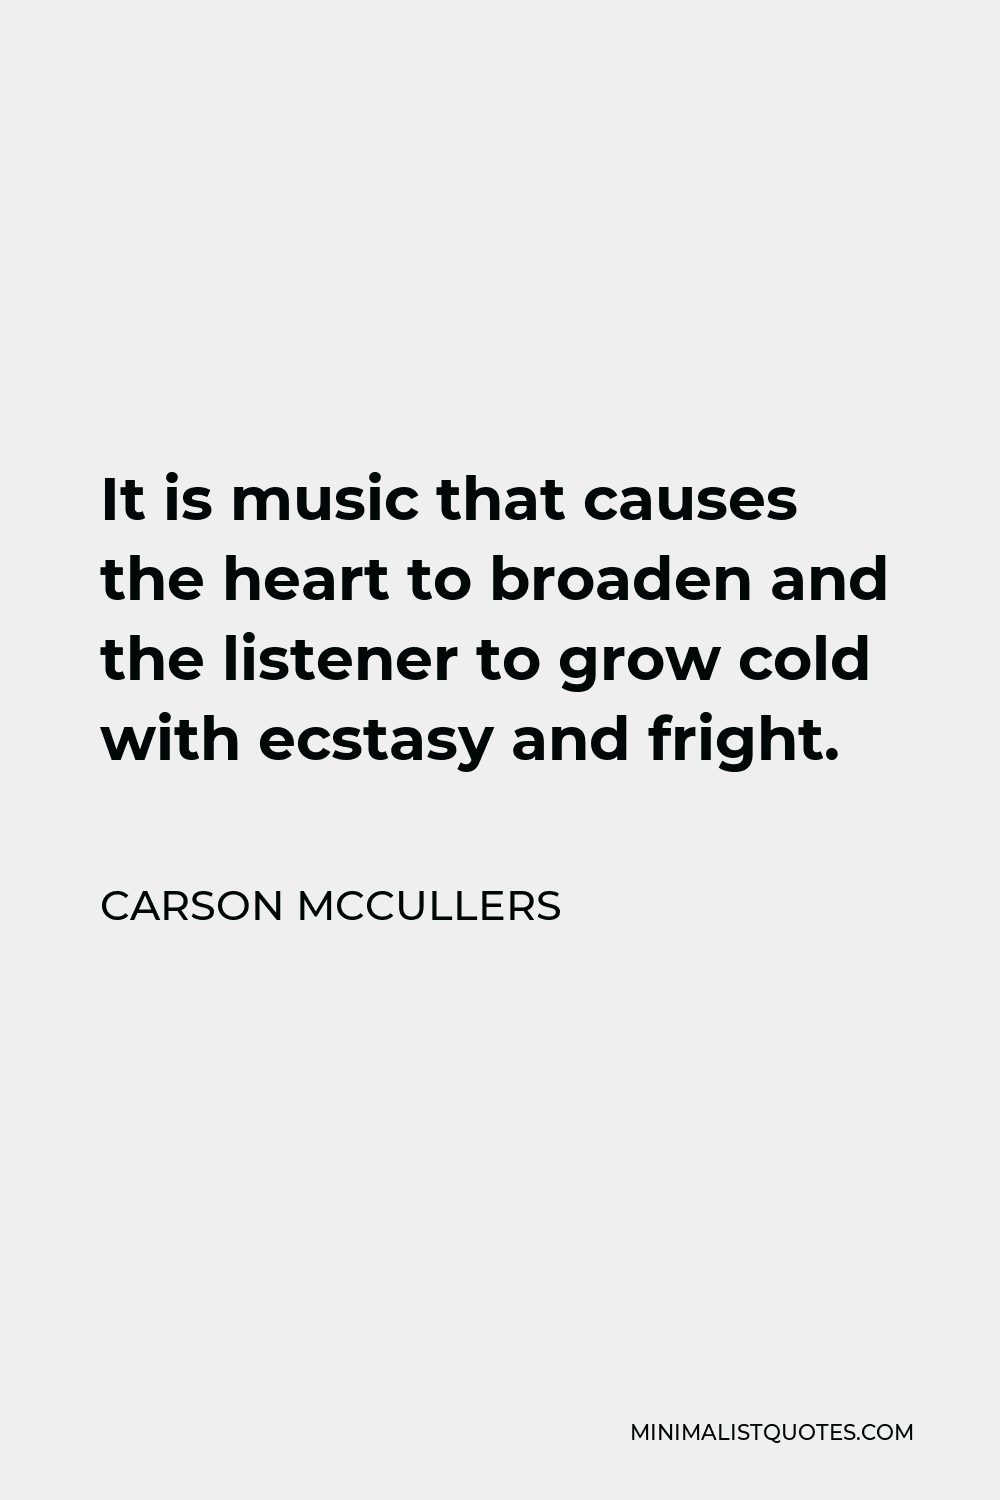 Carson McCullers Quote - It is music that causes the heart to broaden and the listener to grow cold with ecstasy and fright.